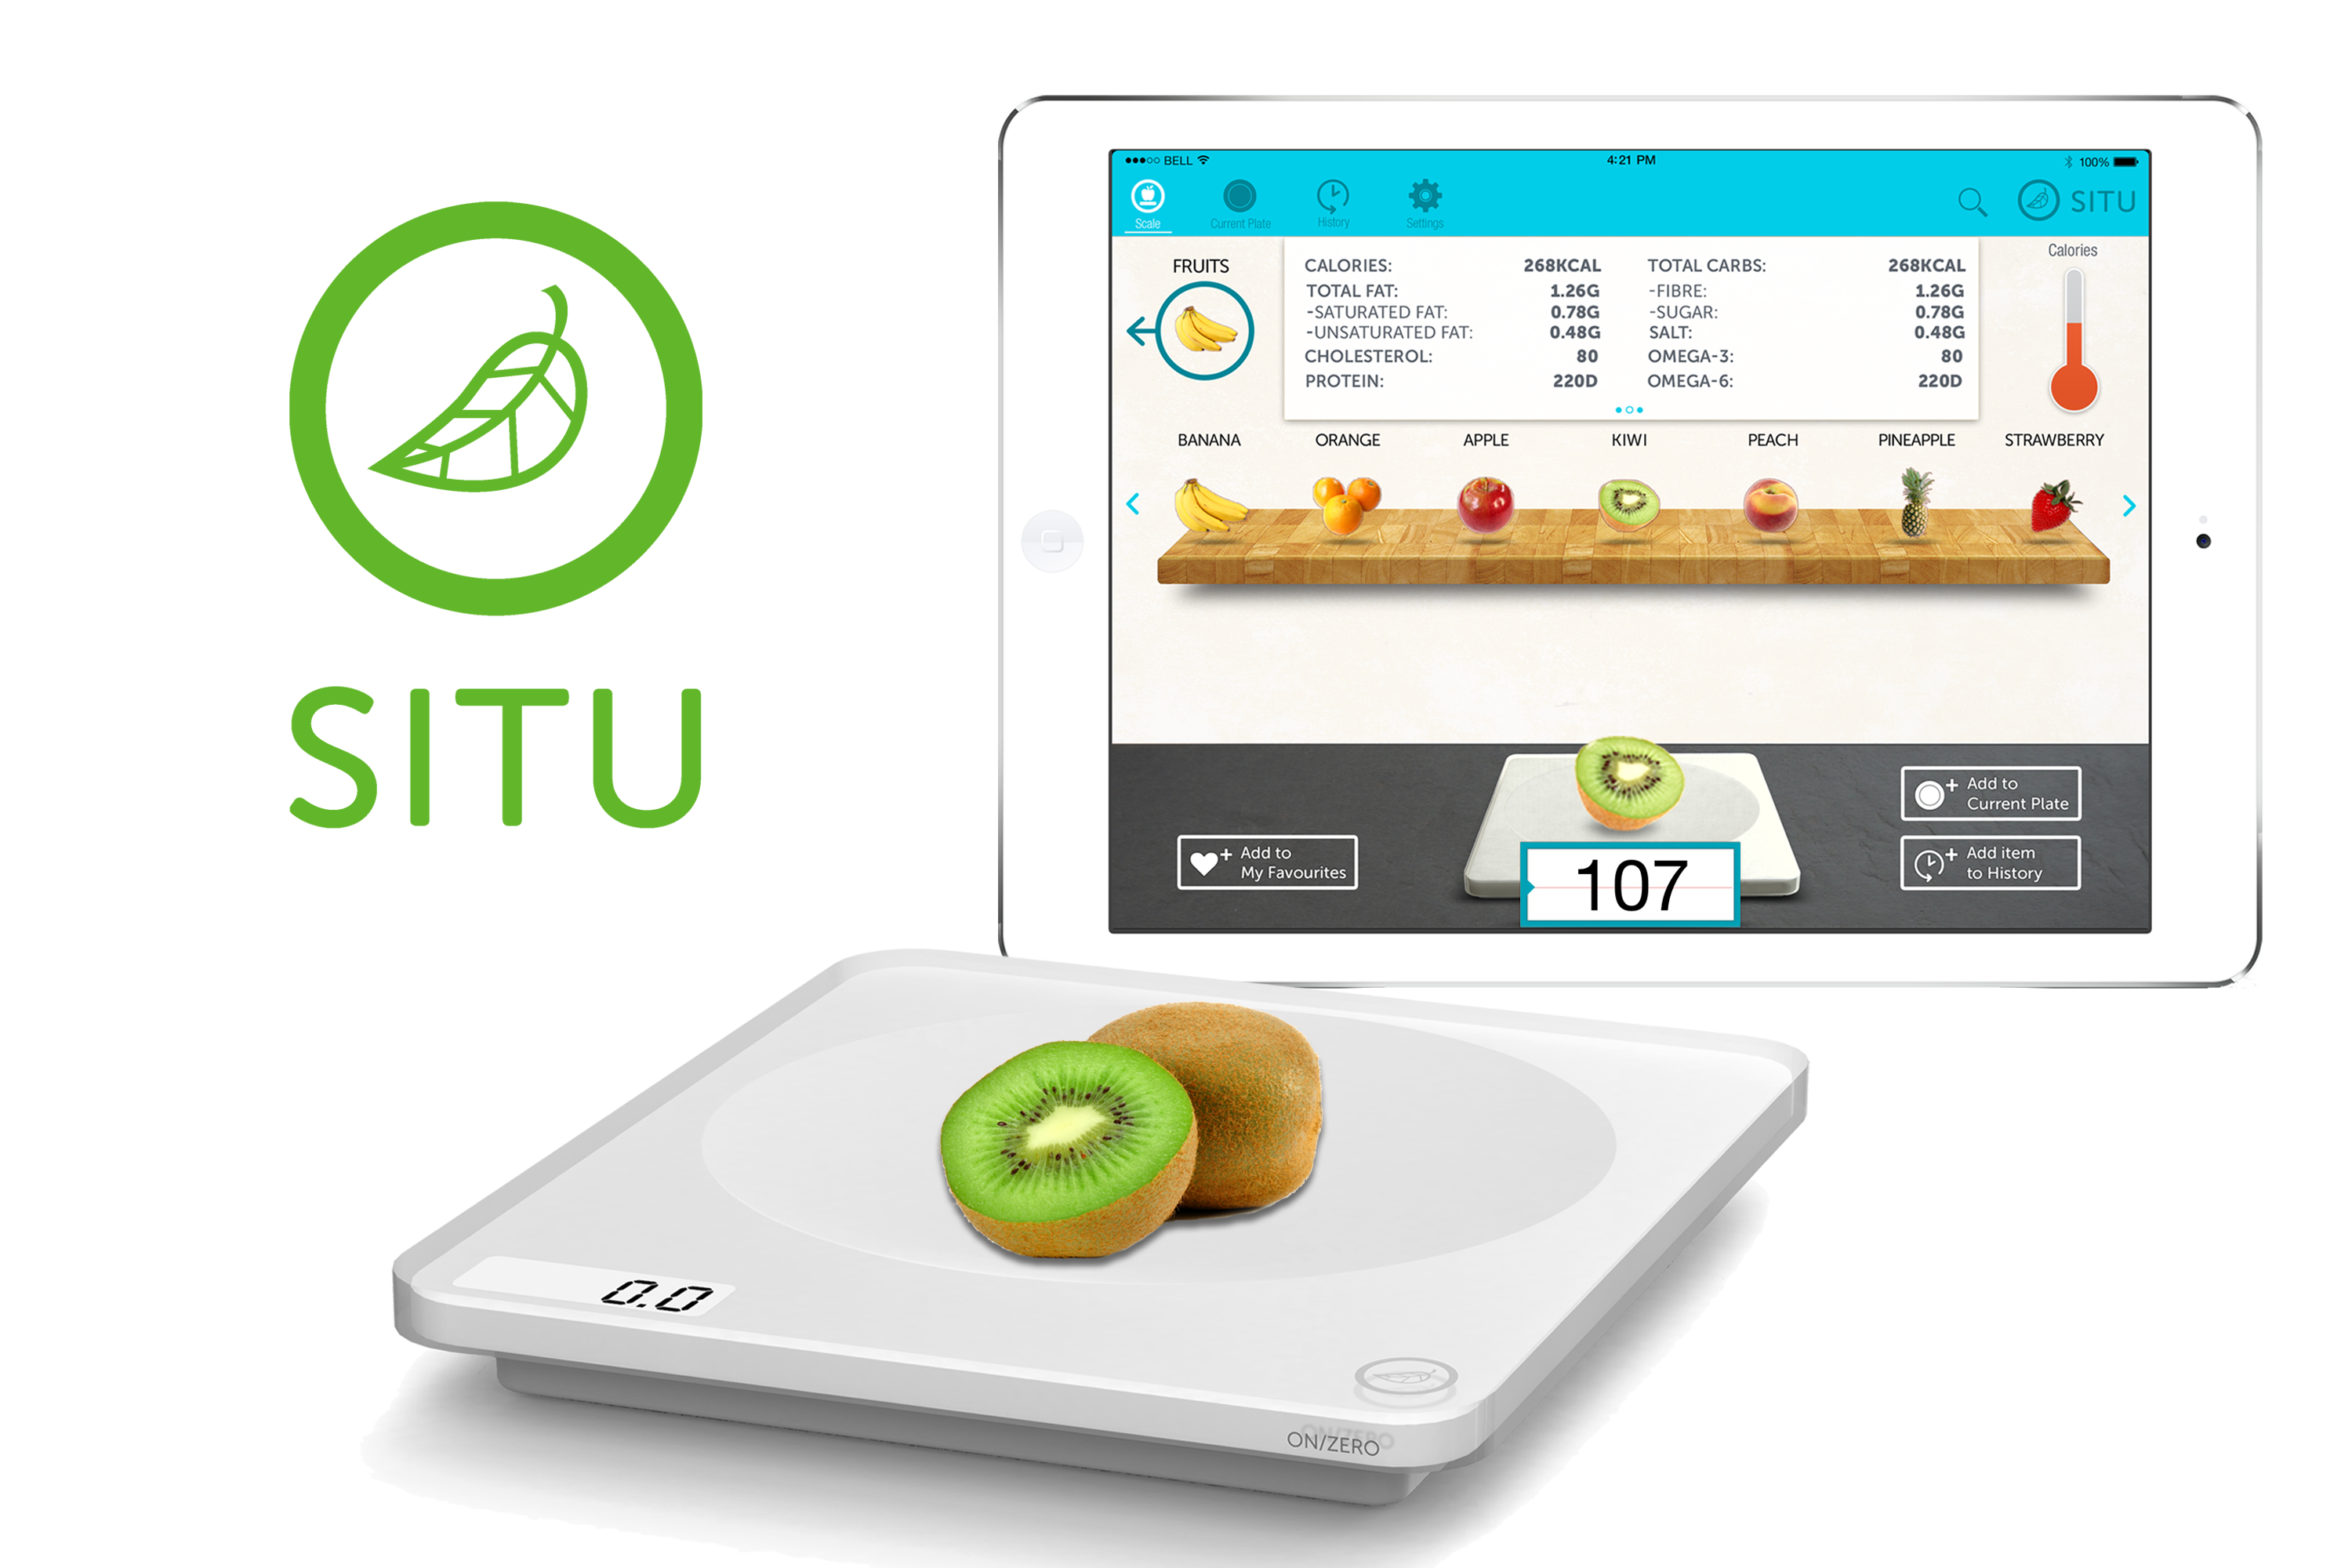 SITU Scale Tallies Up The Nutritional Information Of All Your Food